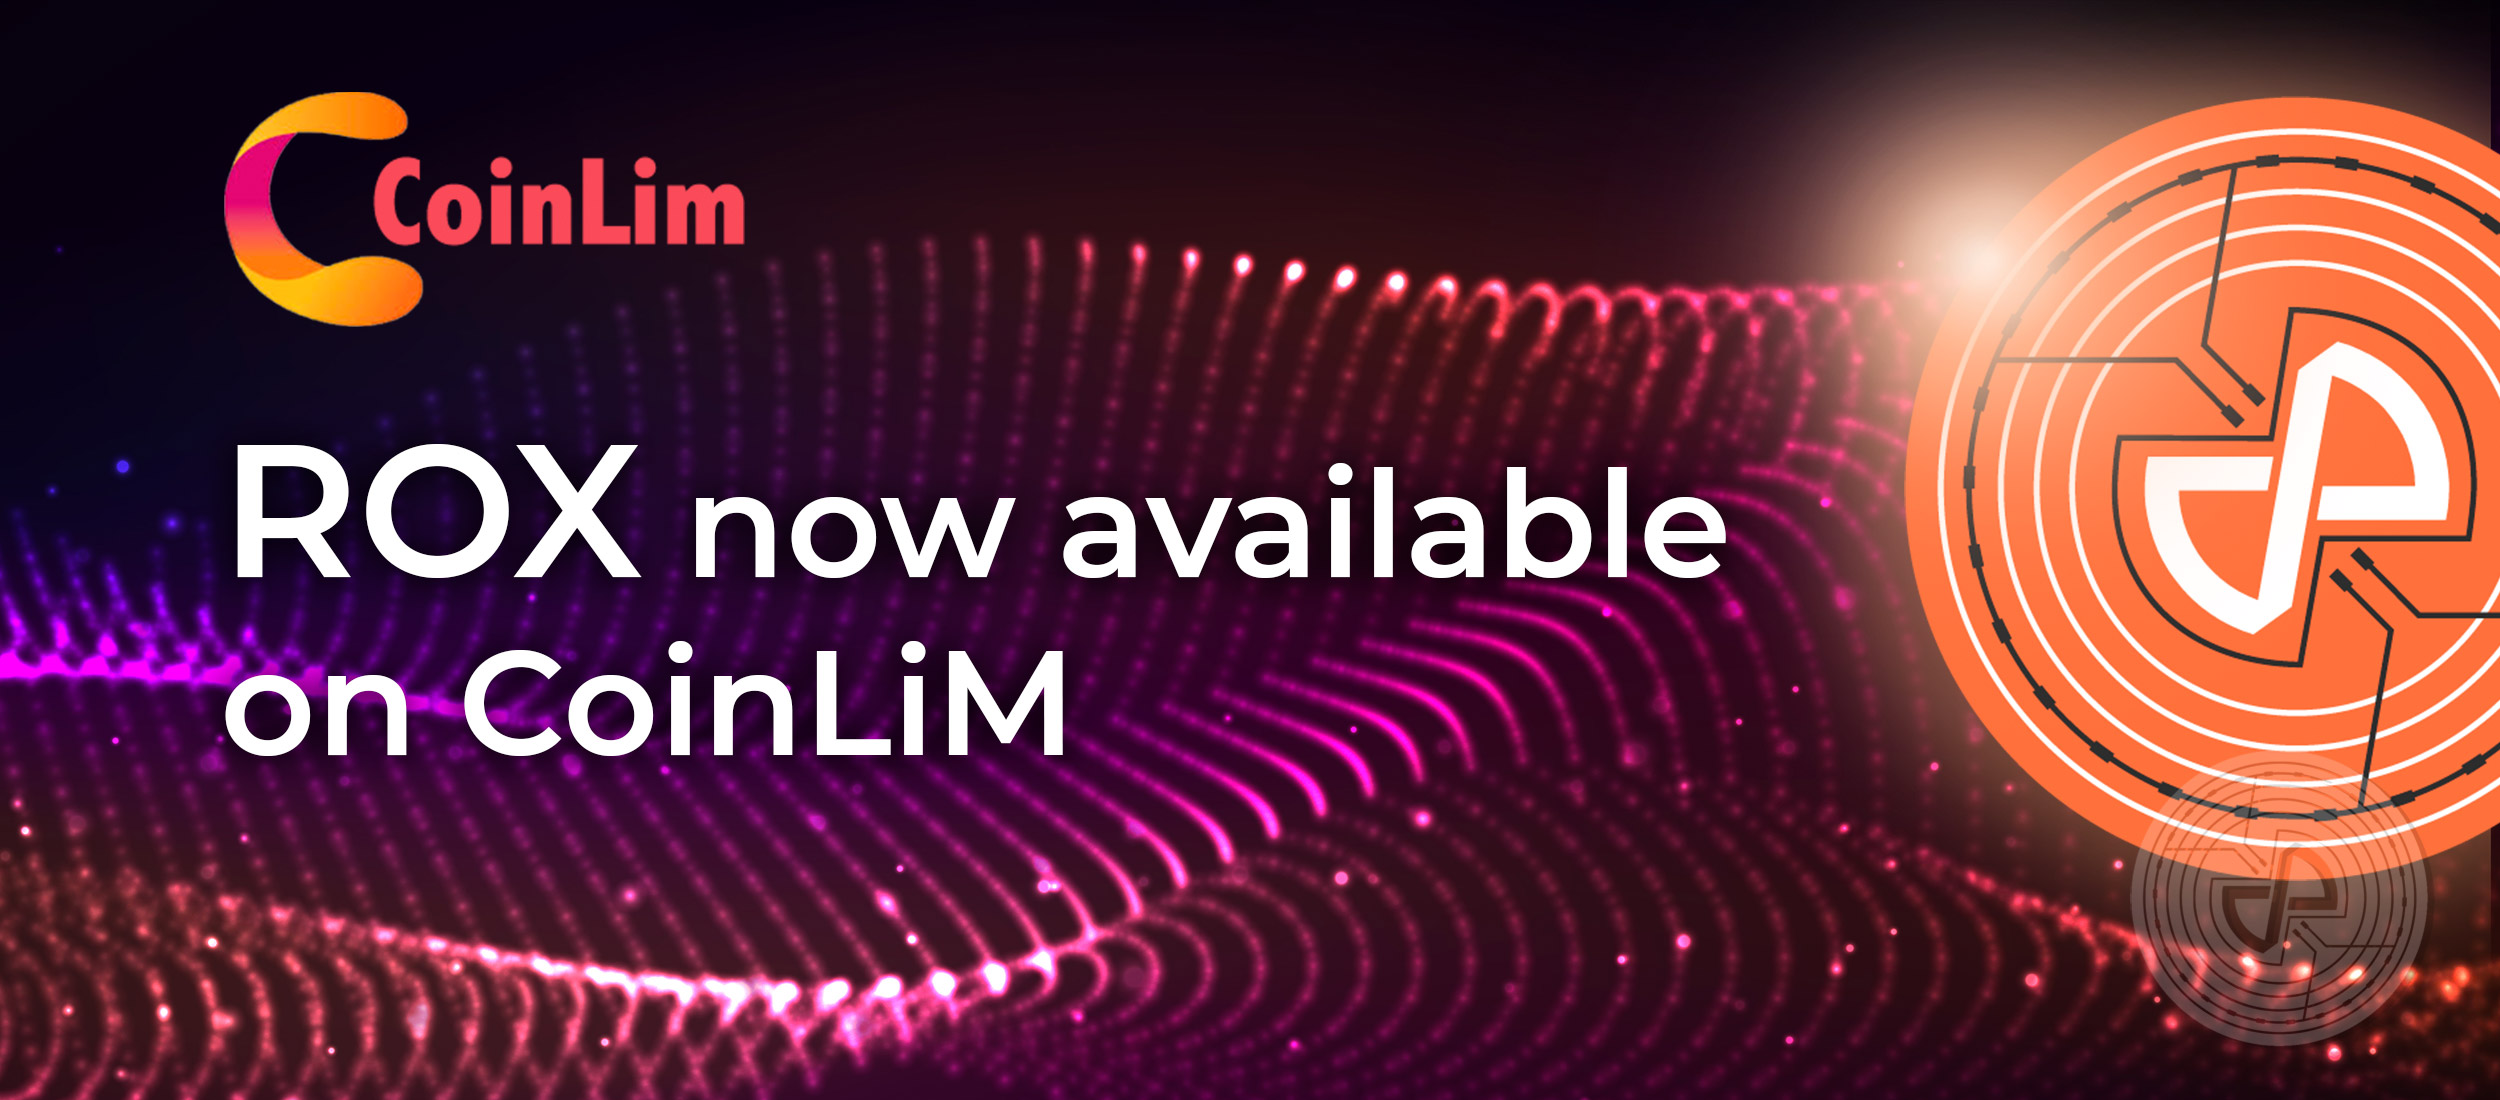 ROX now available on CoinLim